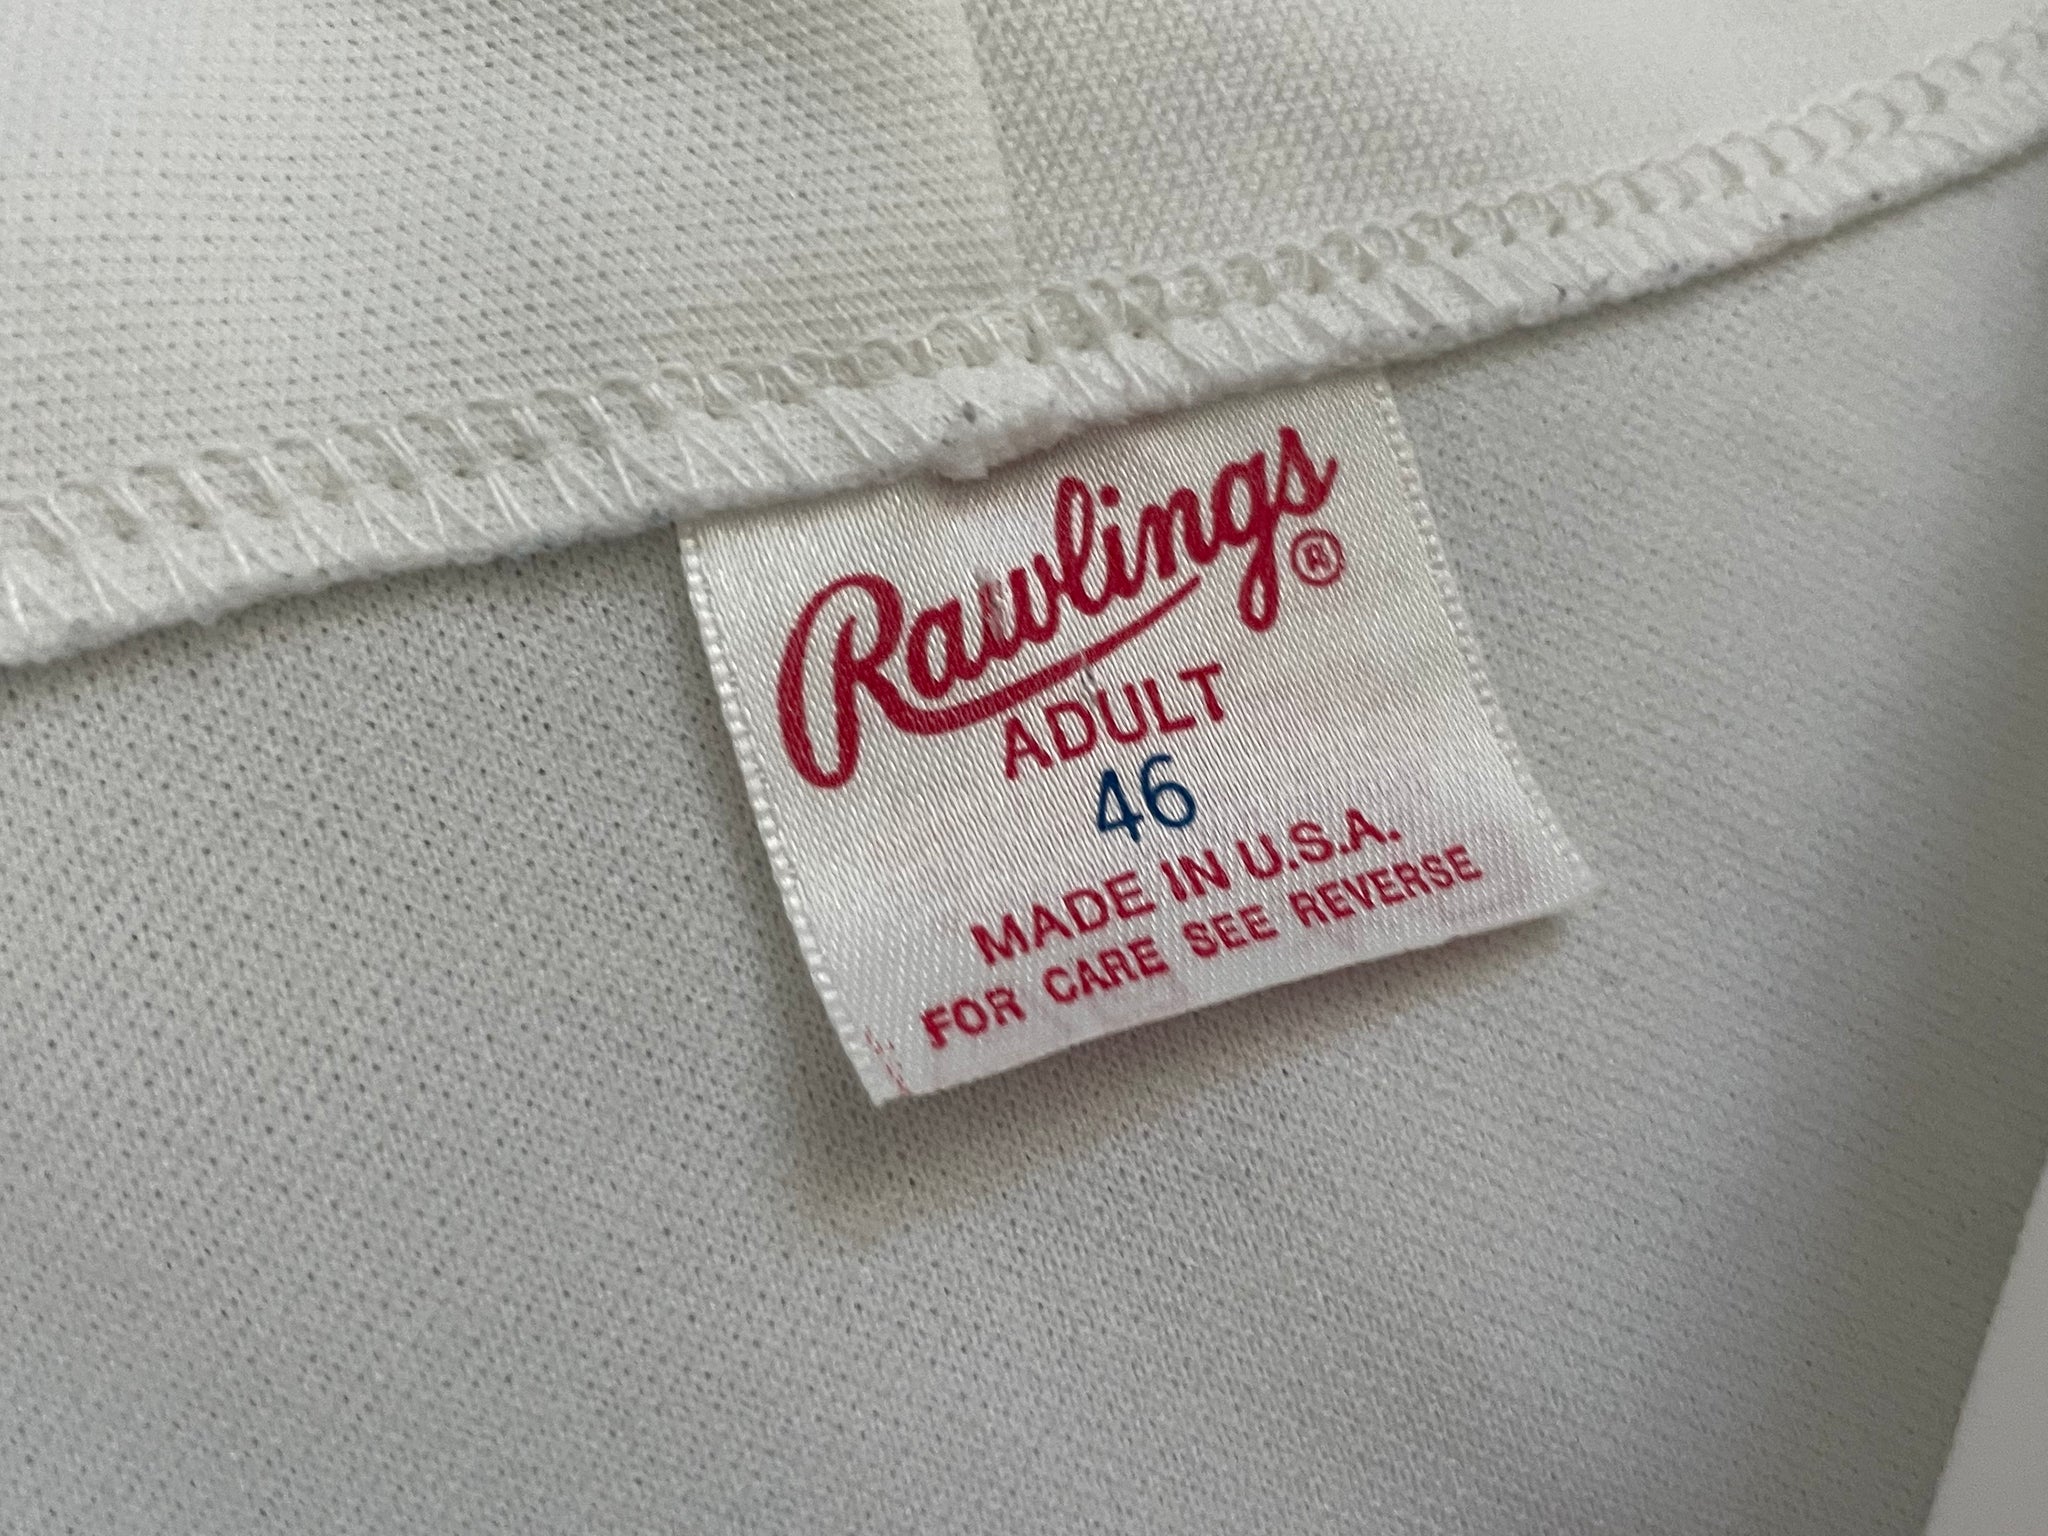 Los Angeles Dodgers Authentic Rawlings Home Jersey Size 44 Vintage